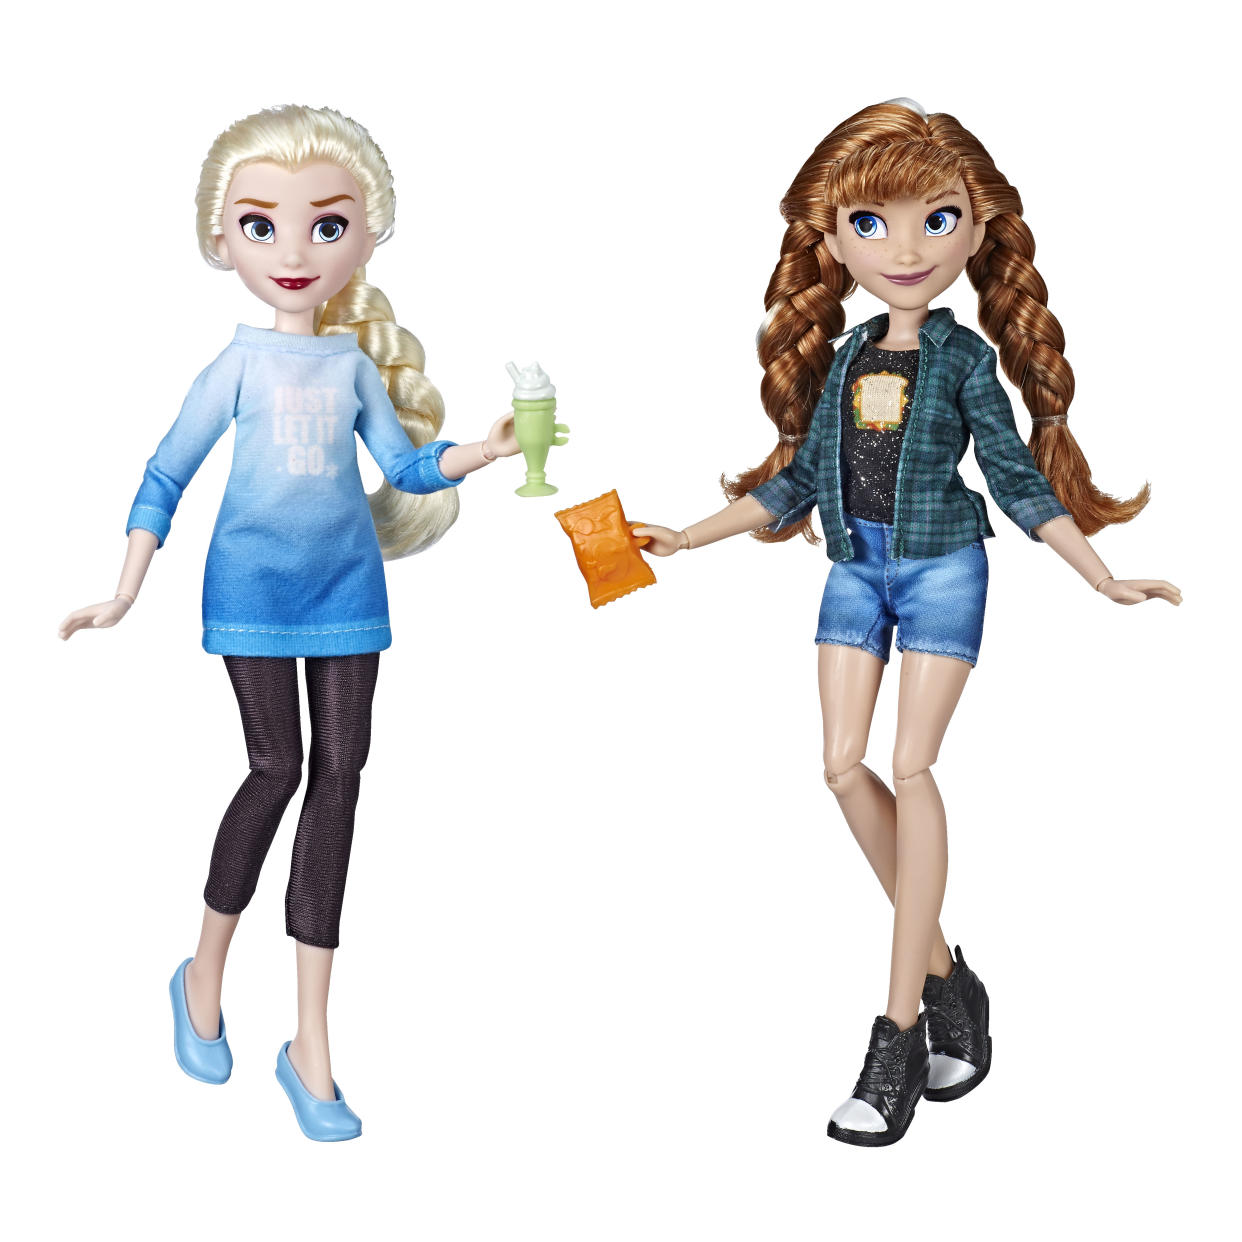 Elsa and Anna in their casual outfits from <em>Ralph Breaks the Internet.</em> (Photo: Hasbro)